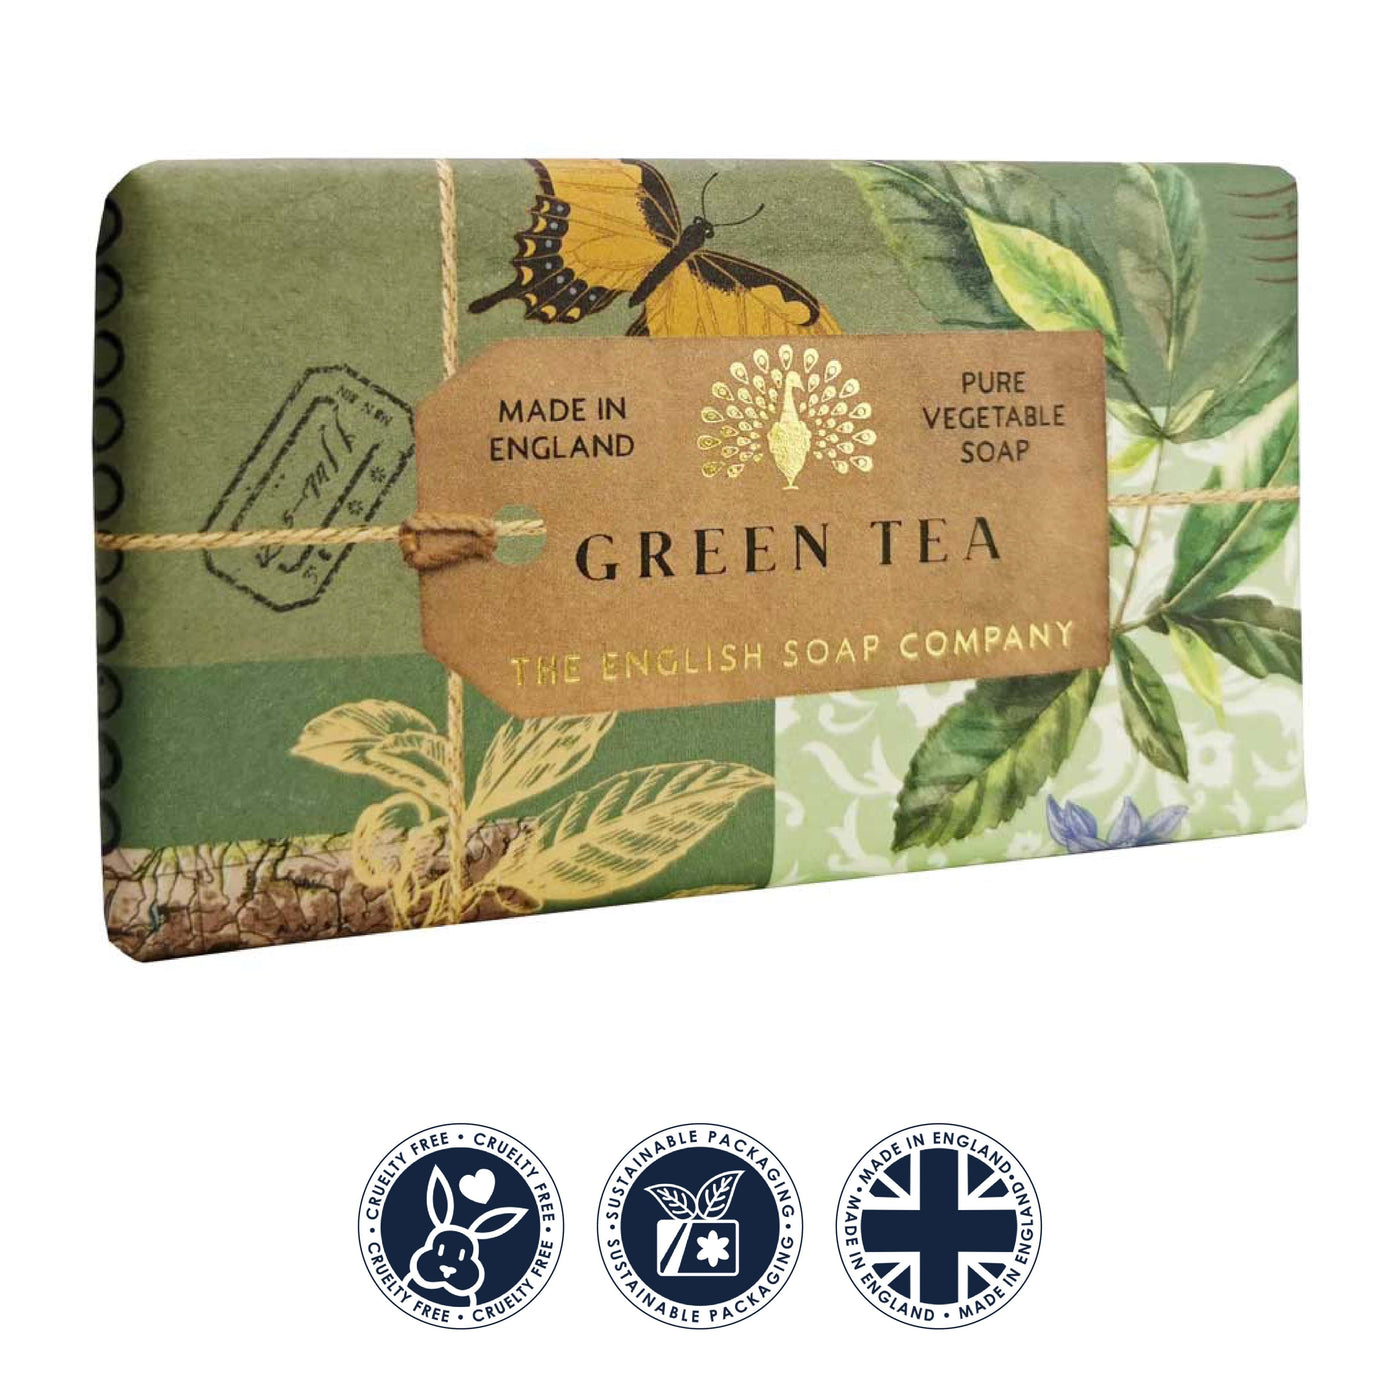 Anniversary Green Tea Soap Bar from our Luxury Bar Soap collection by The English Soap Company